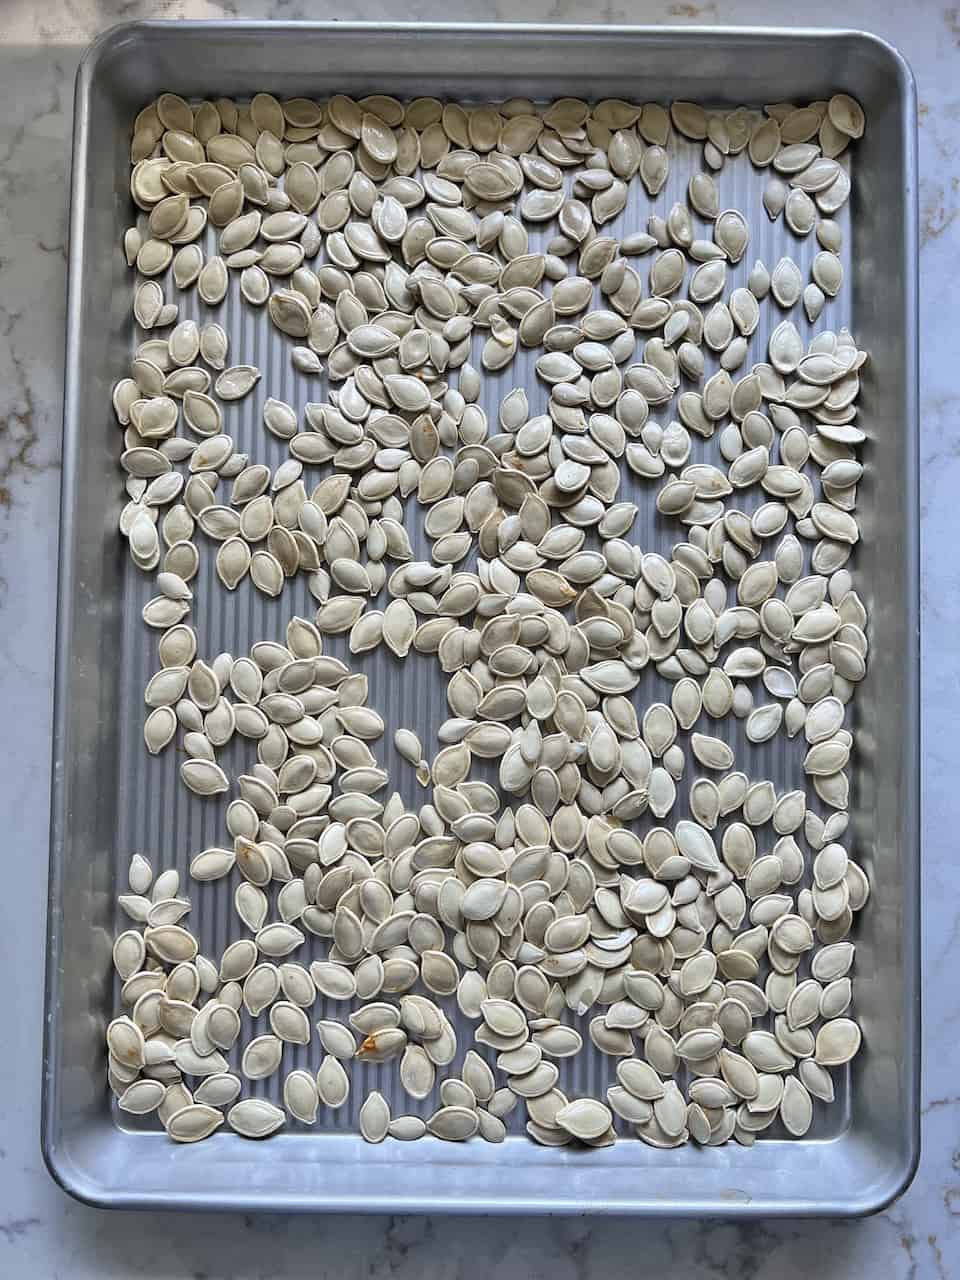 unbaked roasted ،y pumpkin seeds on a tray